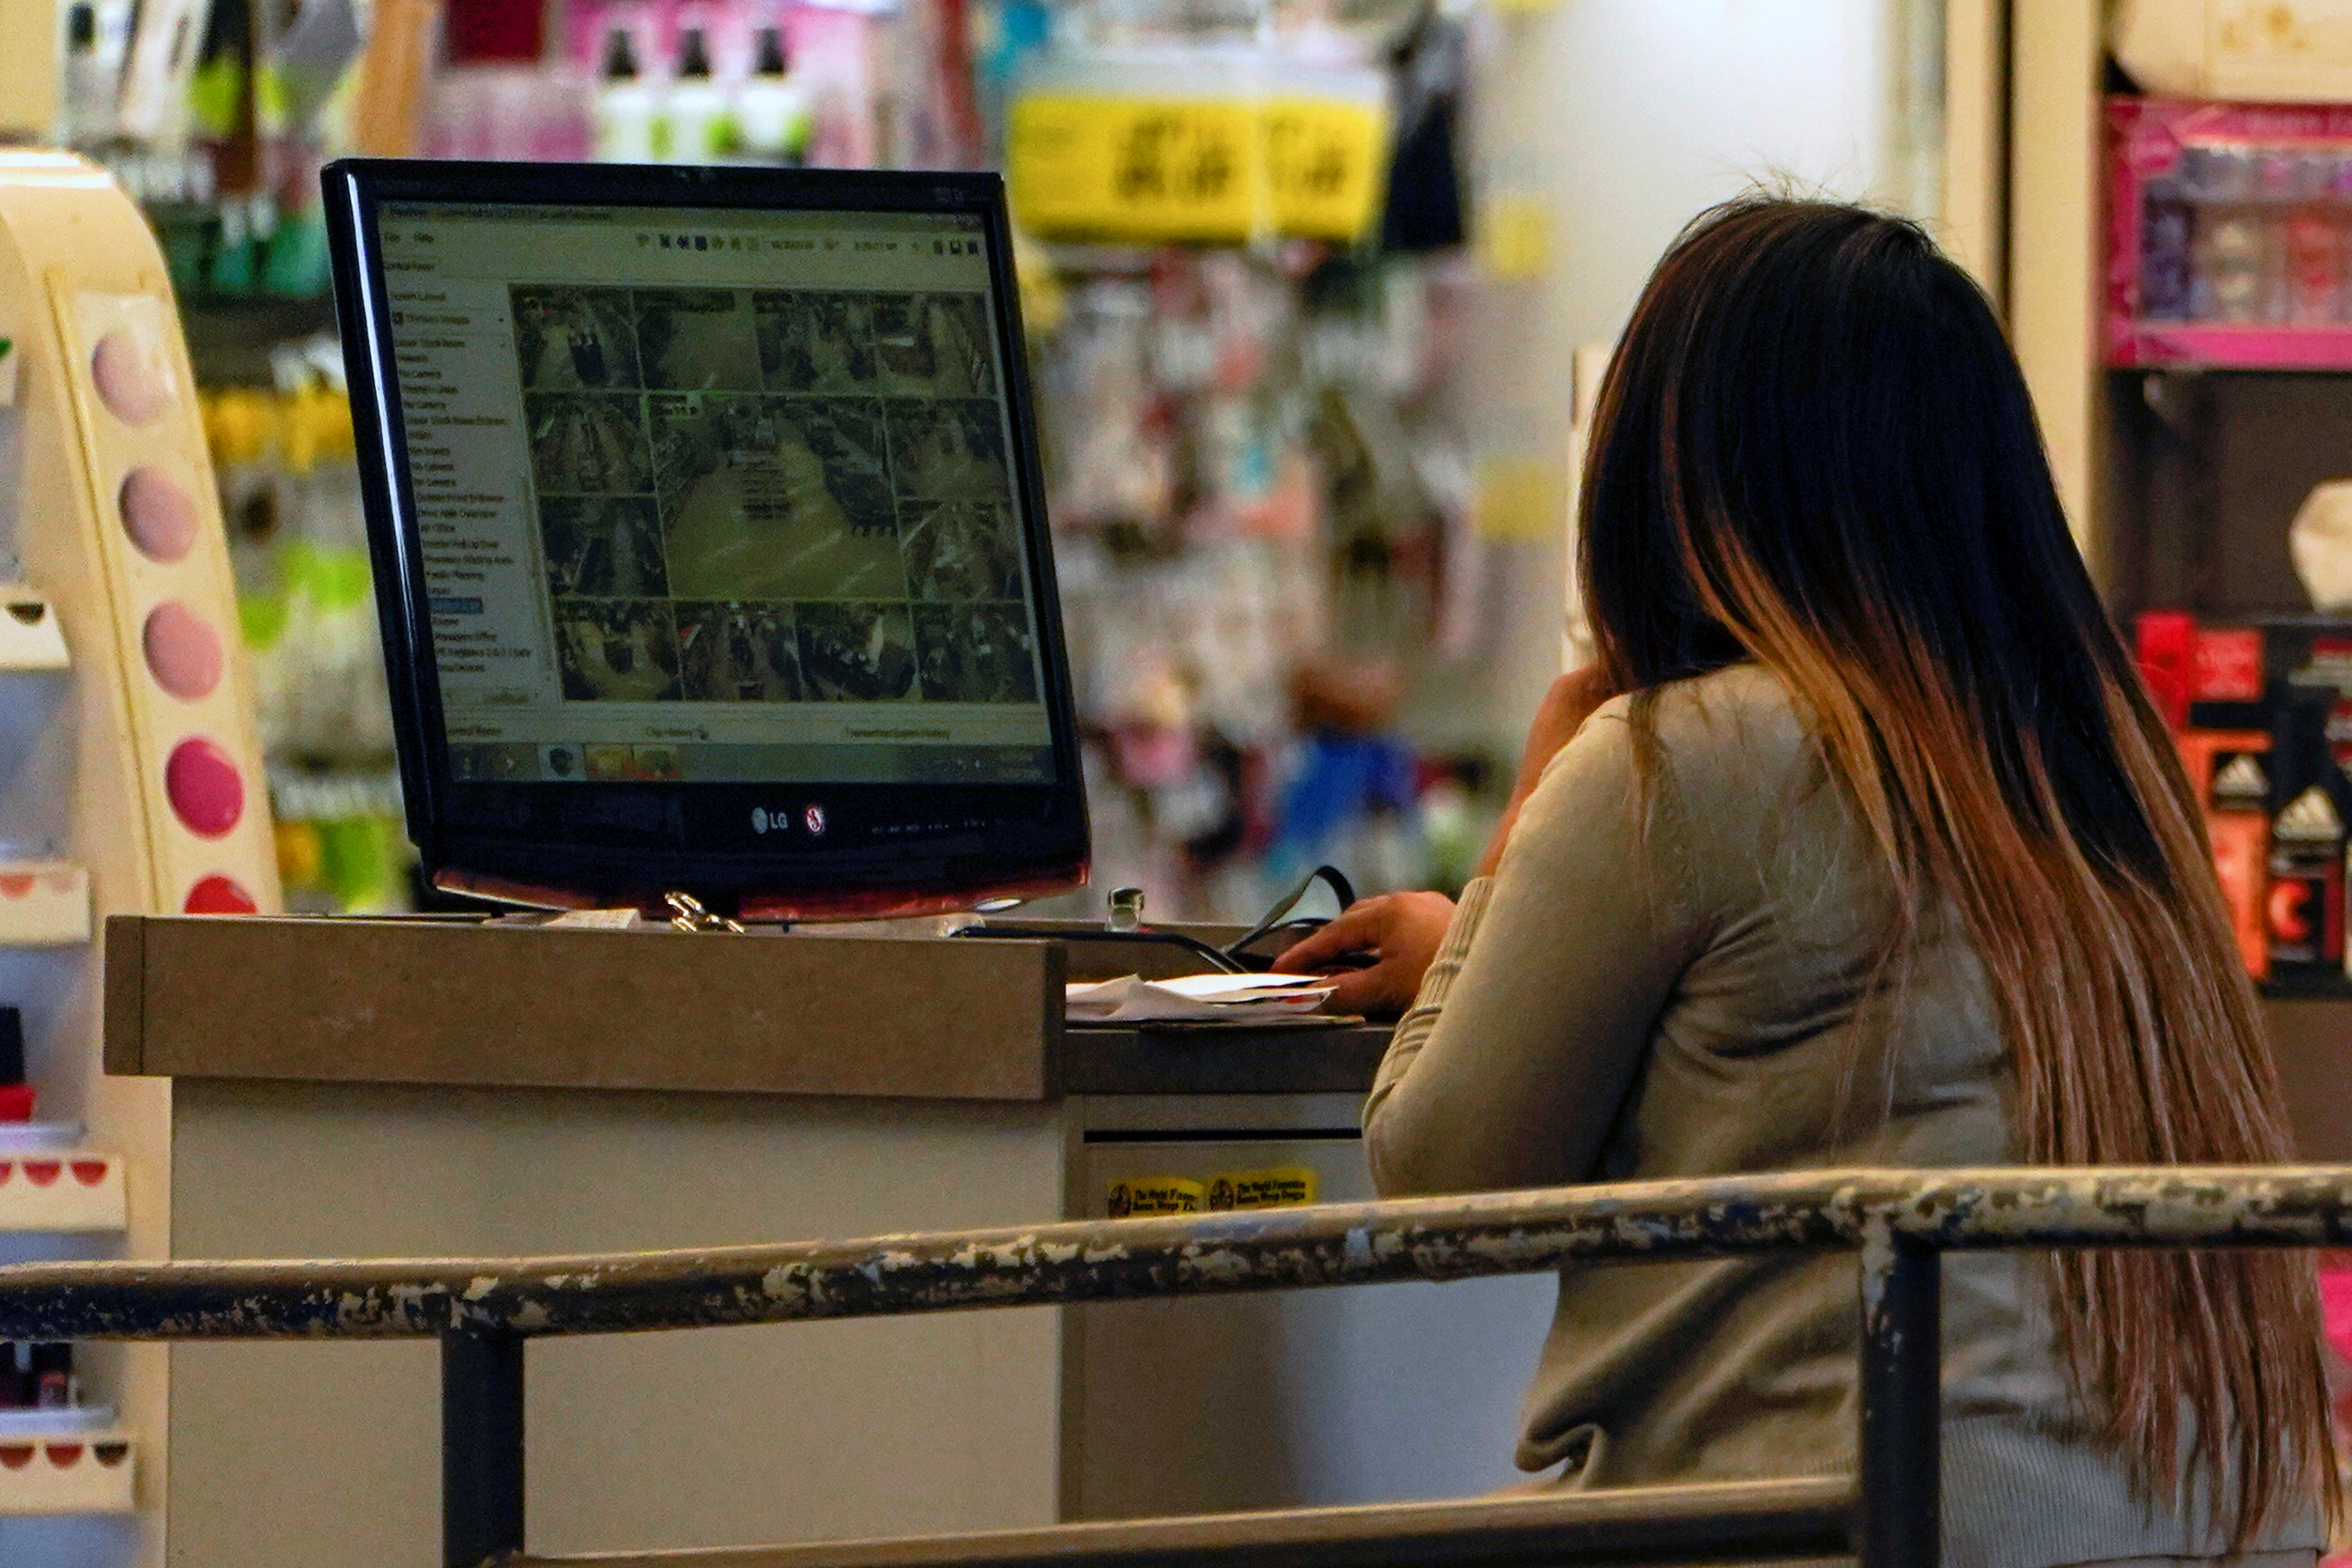 A Rite Aid store worker looks over security camera footage from facial recognition cameras in one of the company's stores in downtown Los Angeles